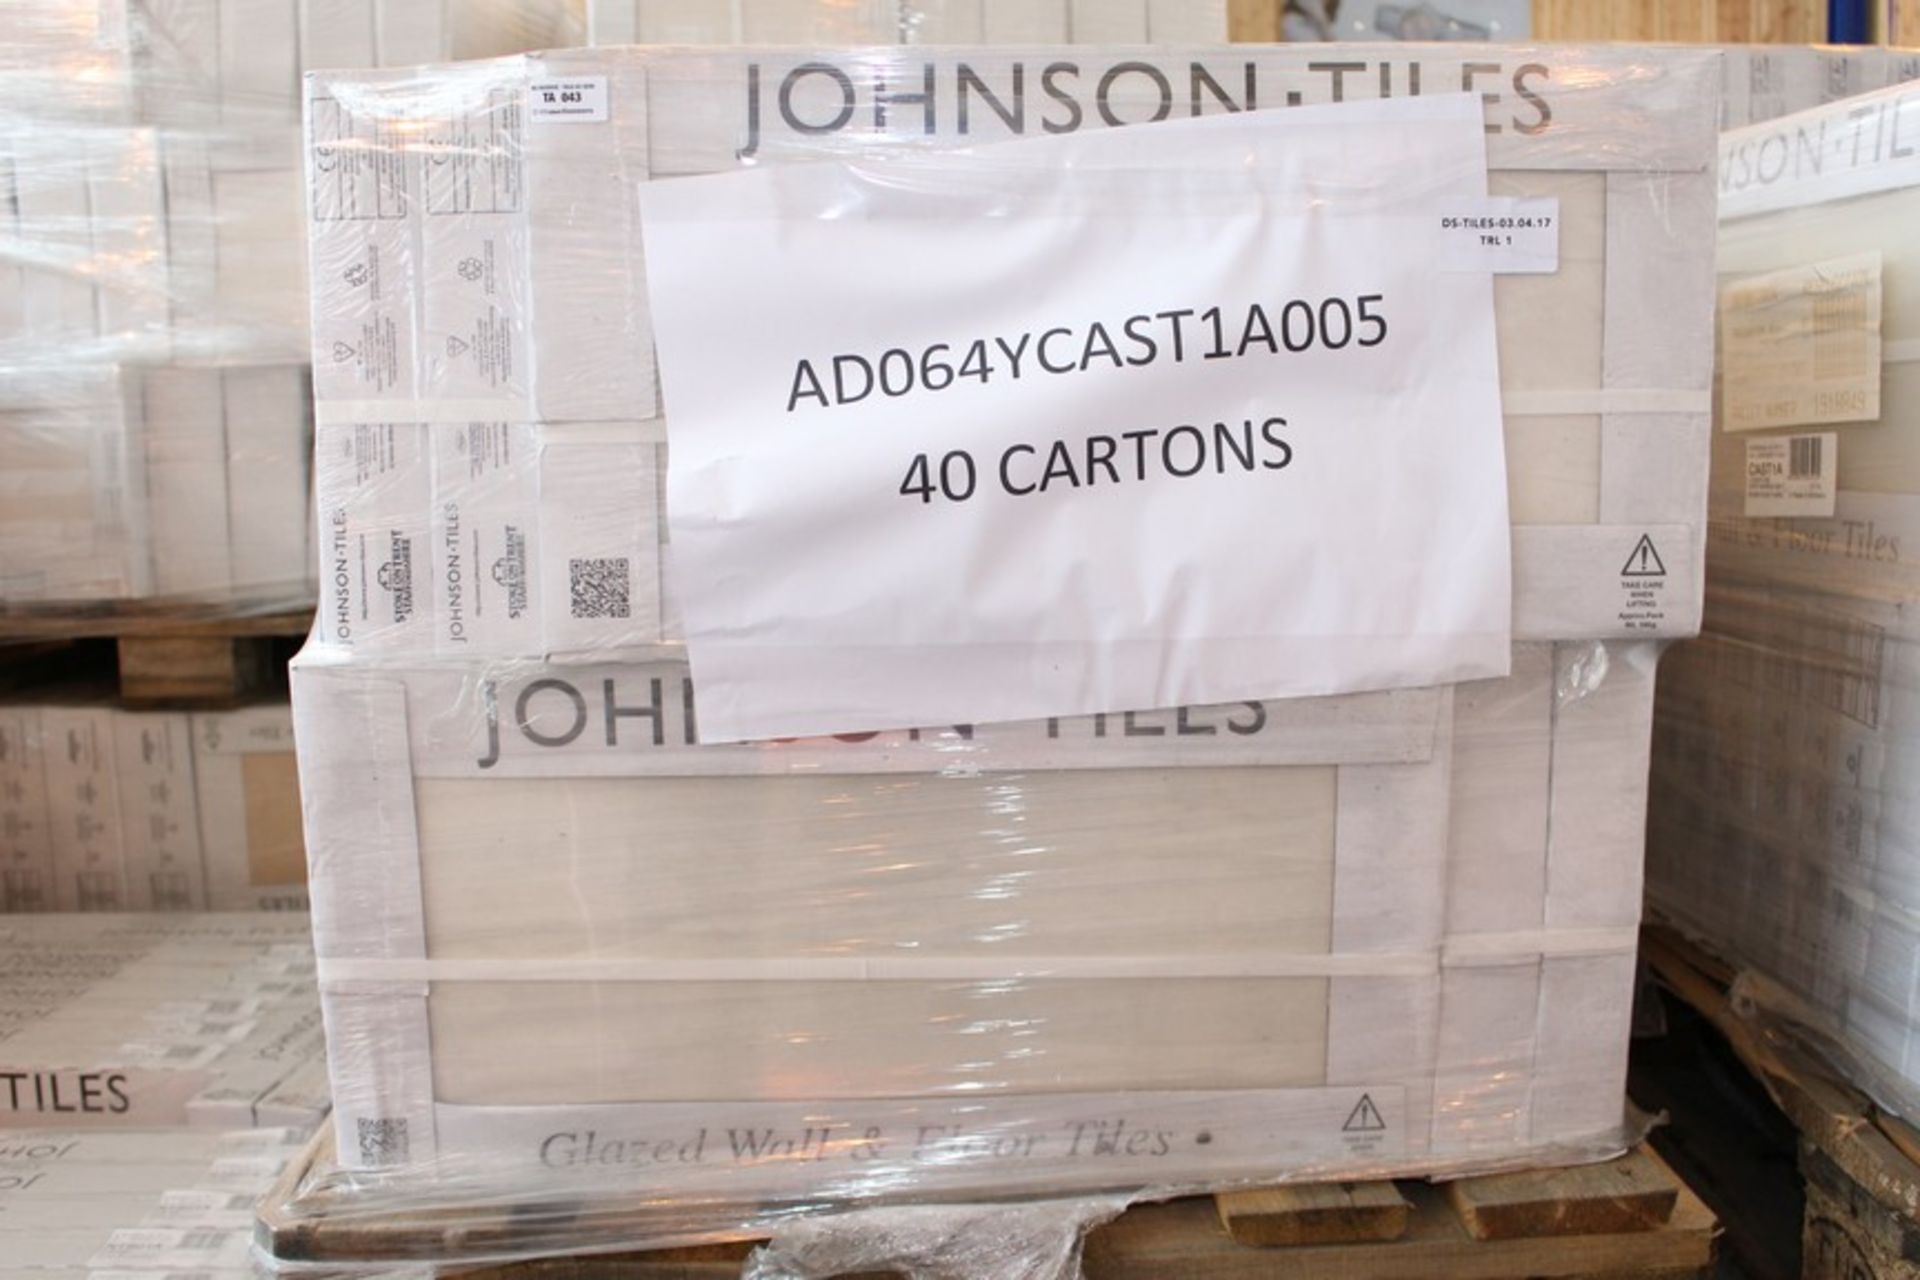 40X BY JOHNSONS TILES FACTORY SEALED GLAZED WALL TILES 300 X 600 RRP £1200 (CAST1A) (DS-TILE) (03. - Image 3 of 3